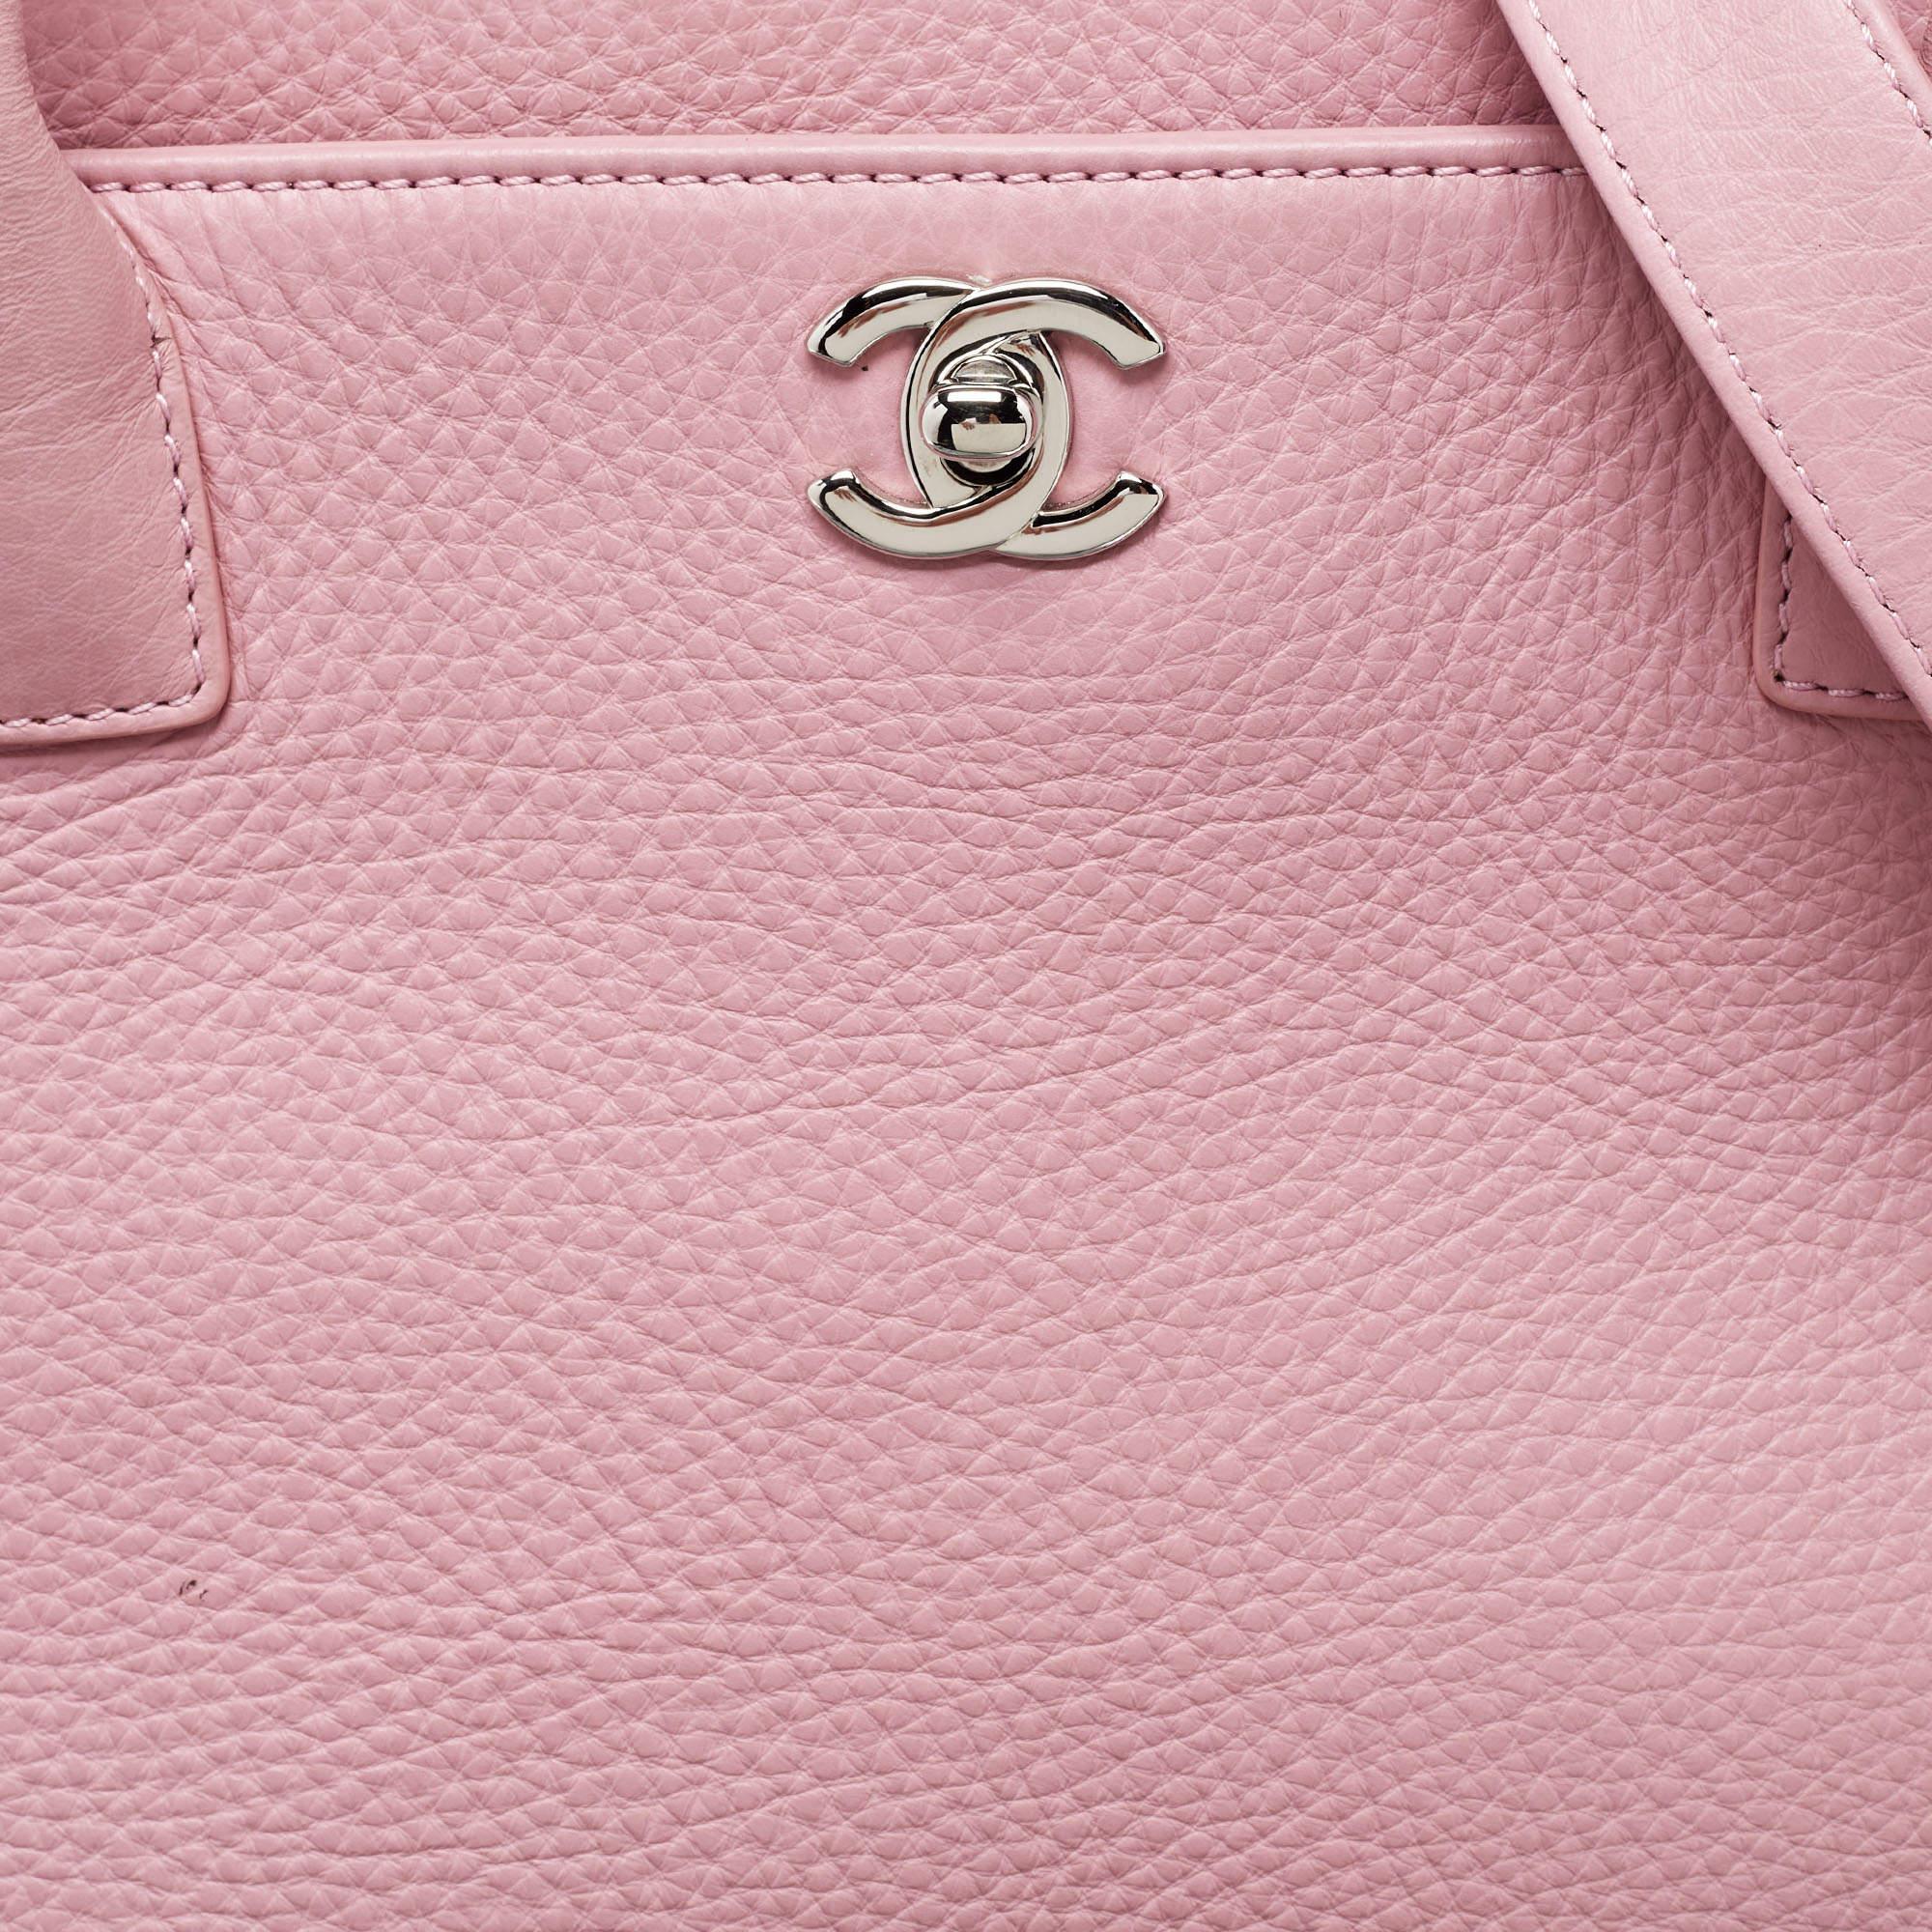 Chanel Pink Leather Executive Cerf Tote 5